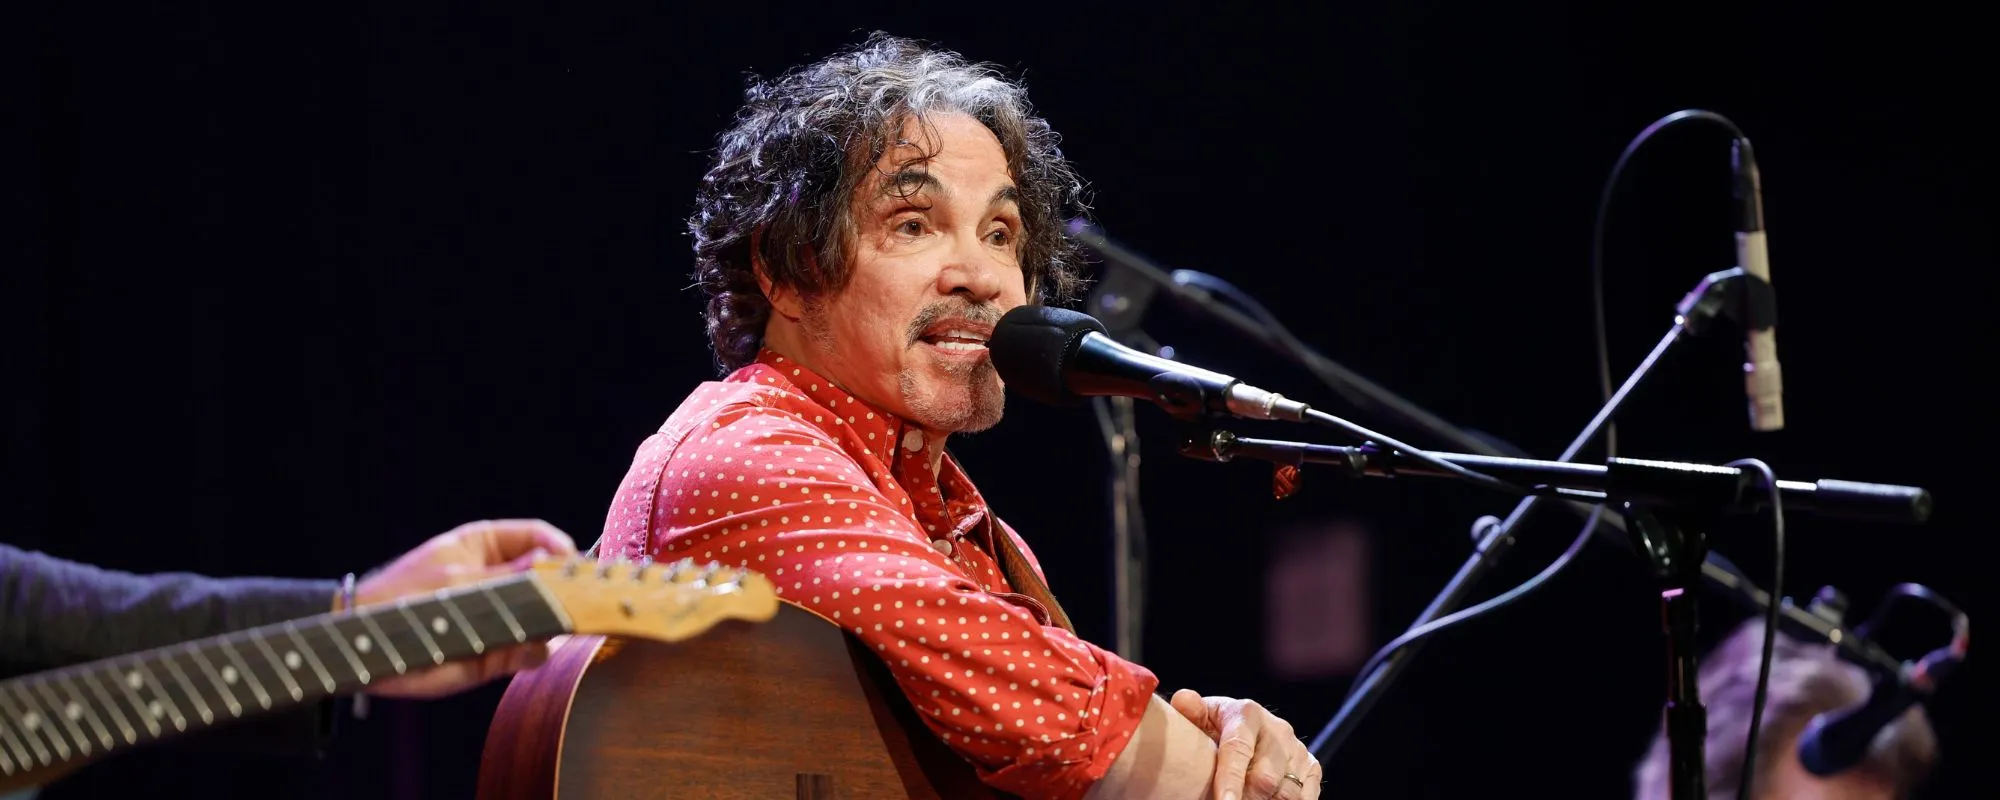 John Oates Has “Moved On” From Hall & Oates After Lawsuit